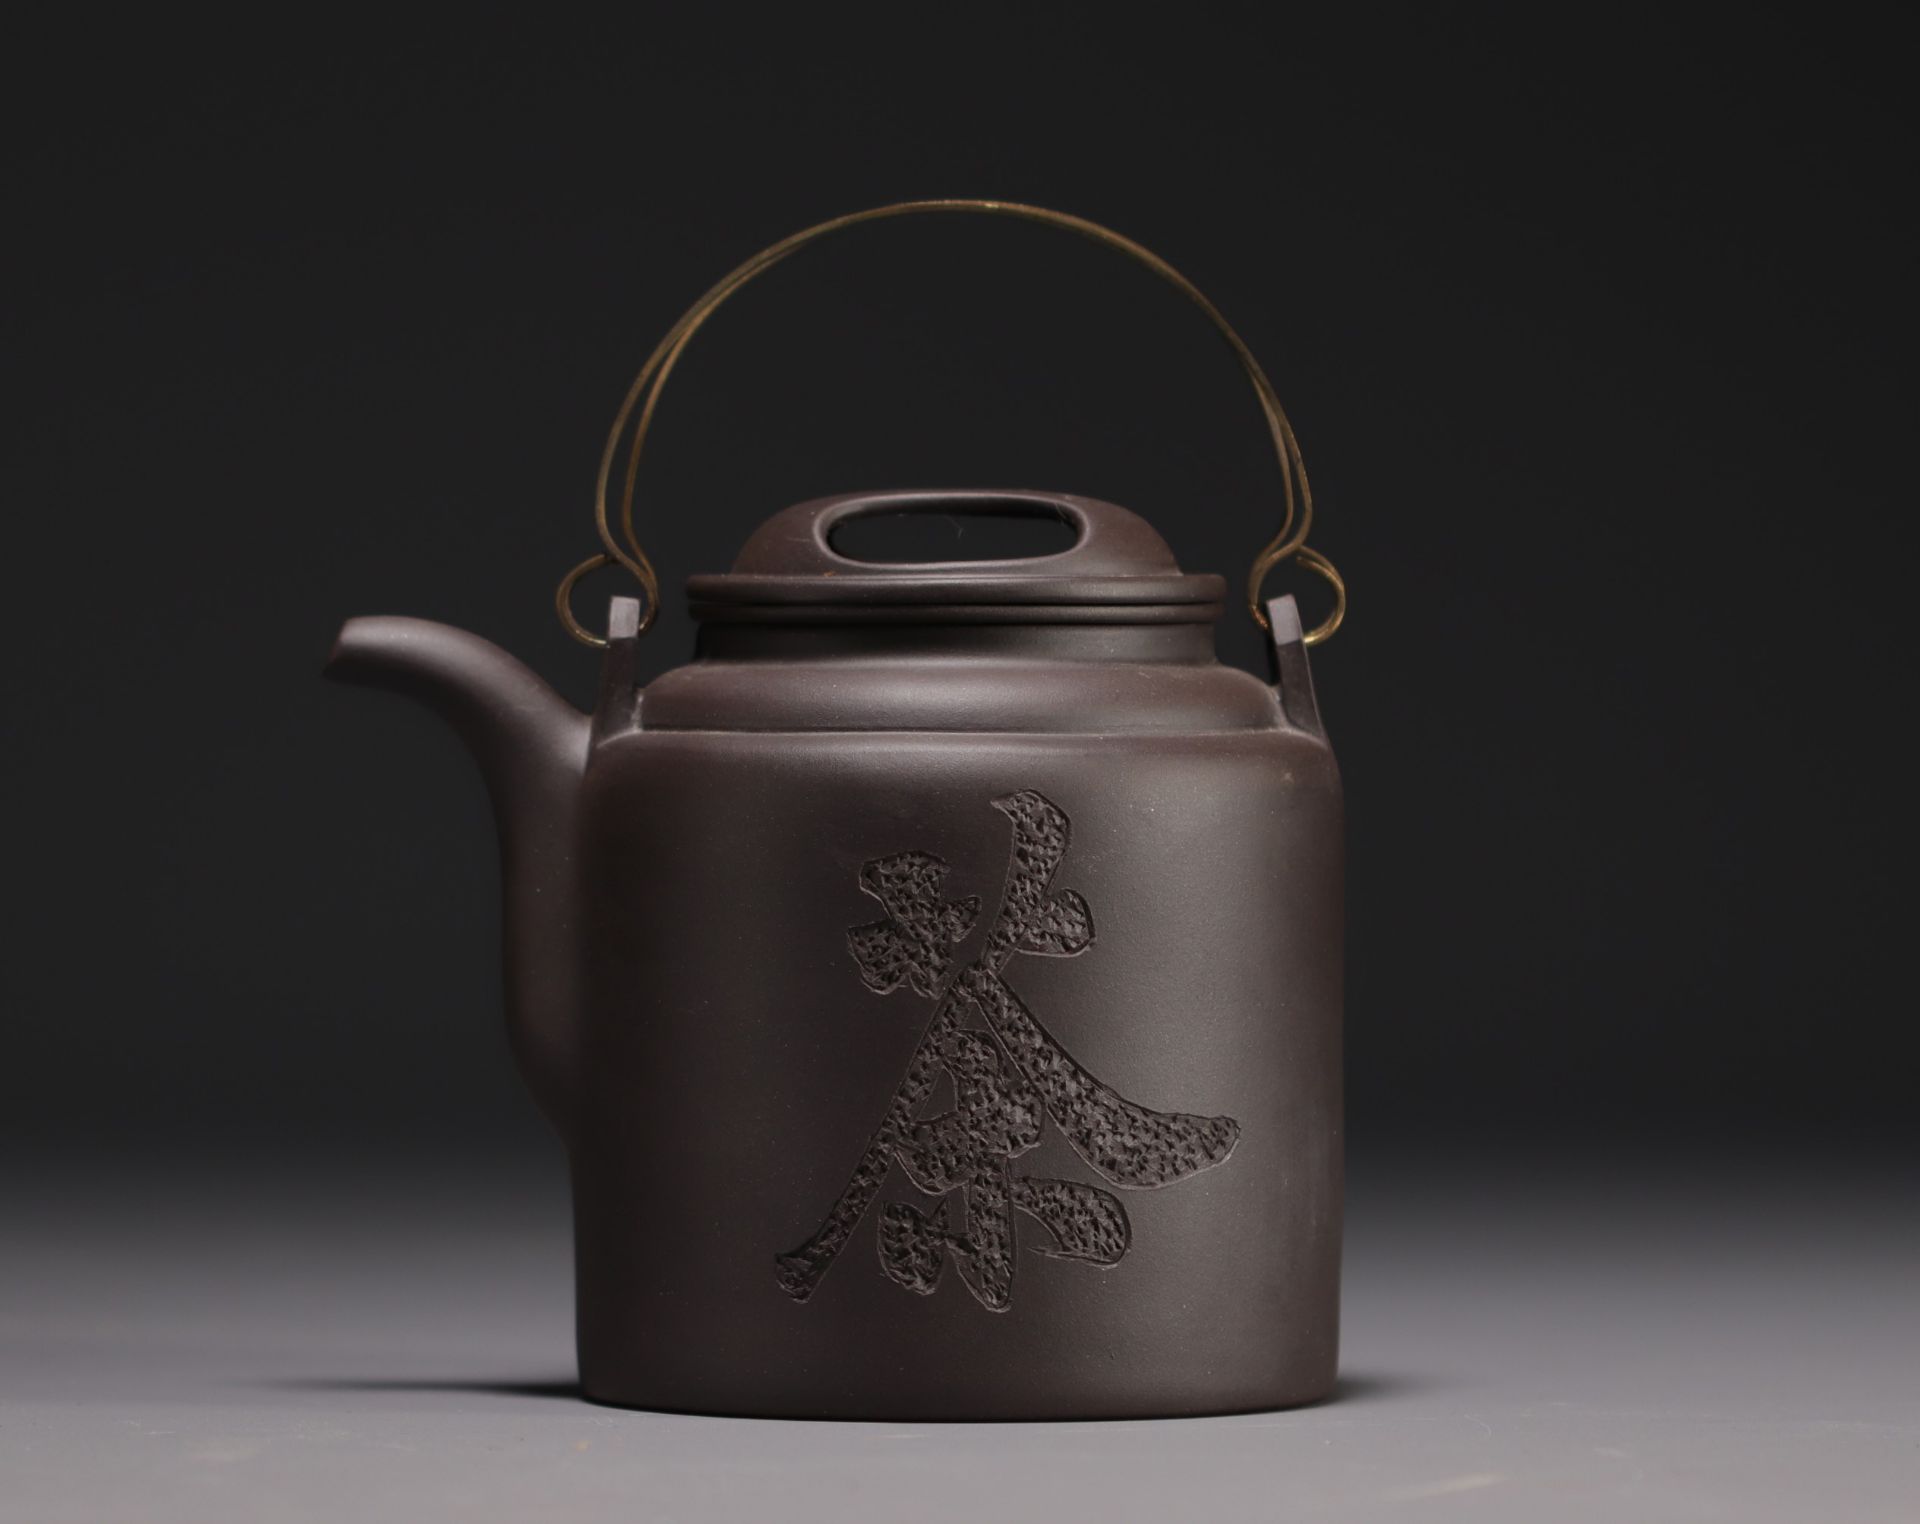 China - Yixing violet clay teapot in its box, 20th century. - Bild 2 aus 5